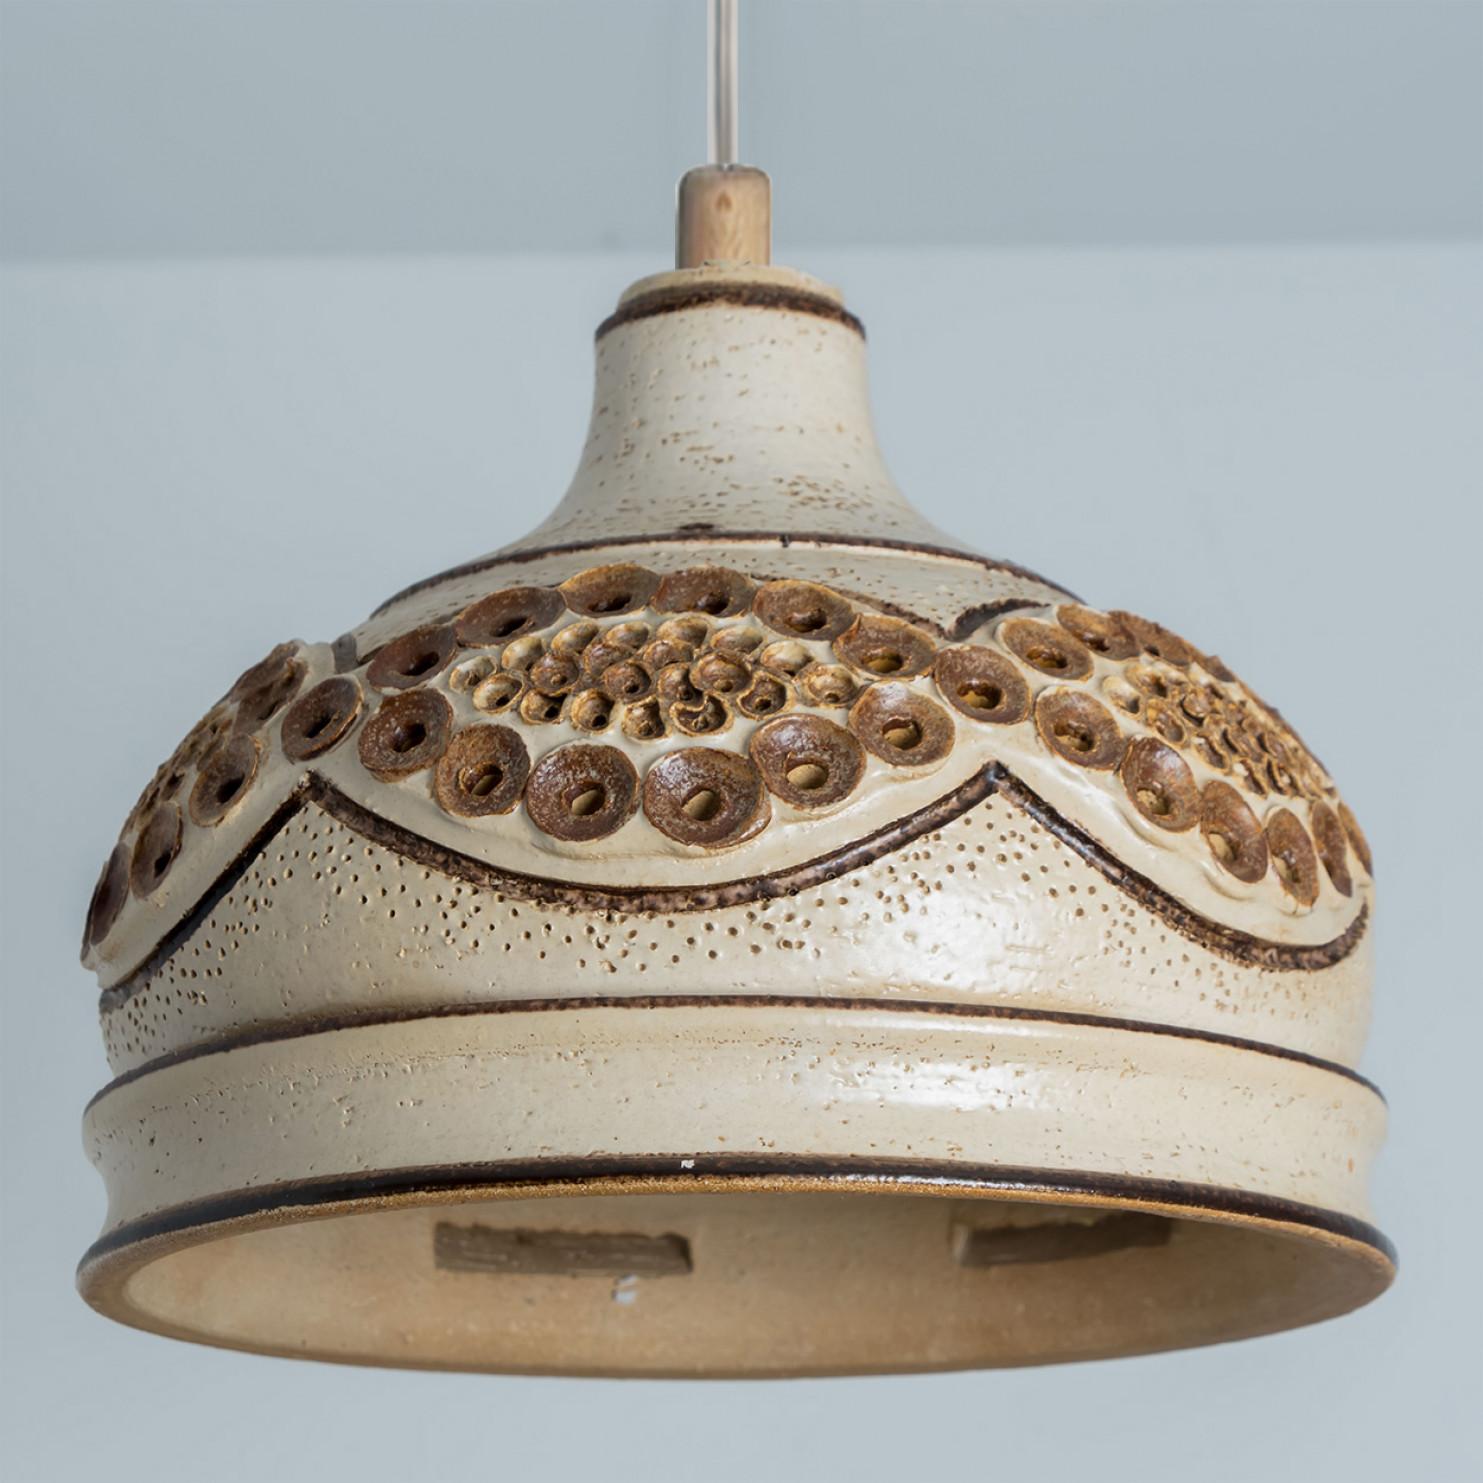 Stunning round hanging lamp with an bowl-like shape, made with rich brown colored beige ceramics, manufactured in the 1970s in Denmark. We also have a multitude of unique colored ceramic light sets and arrangements, all available in the frontstore. 